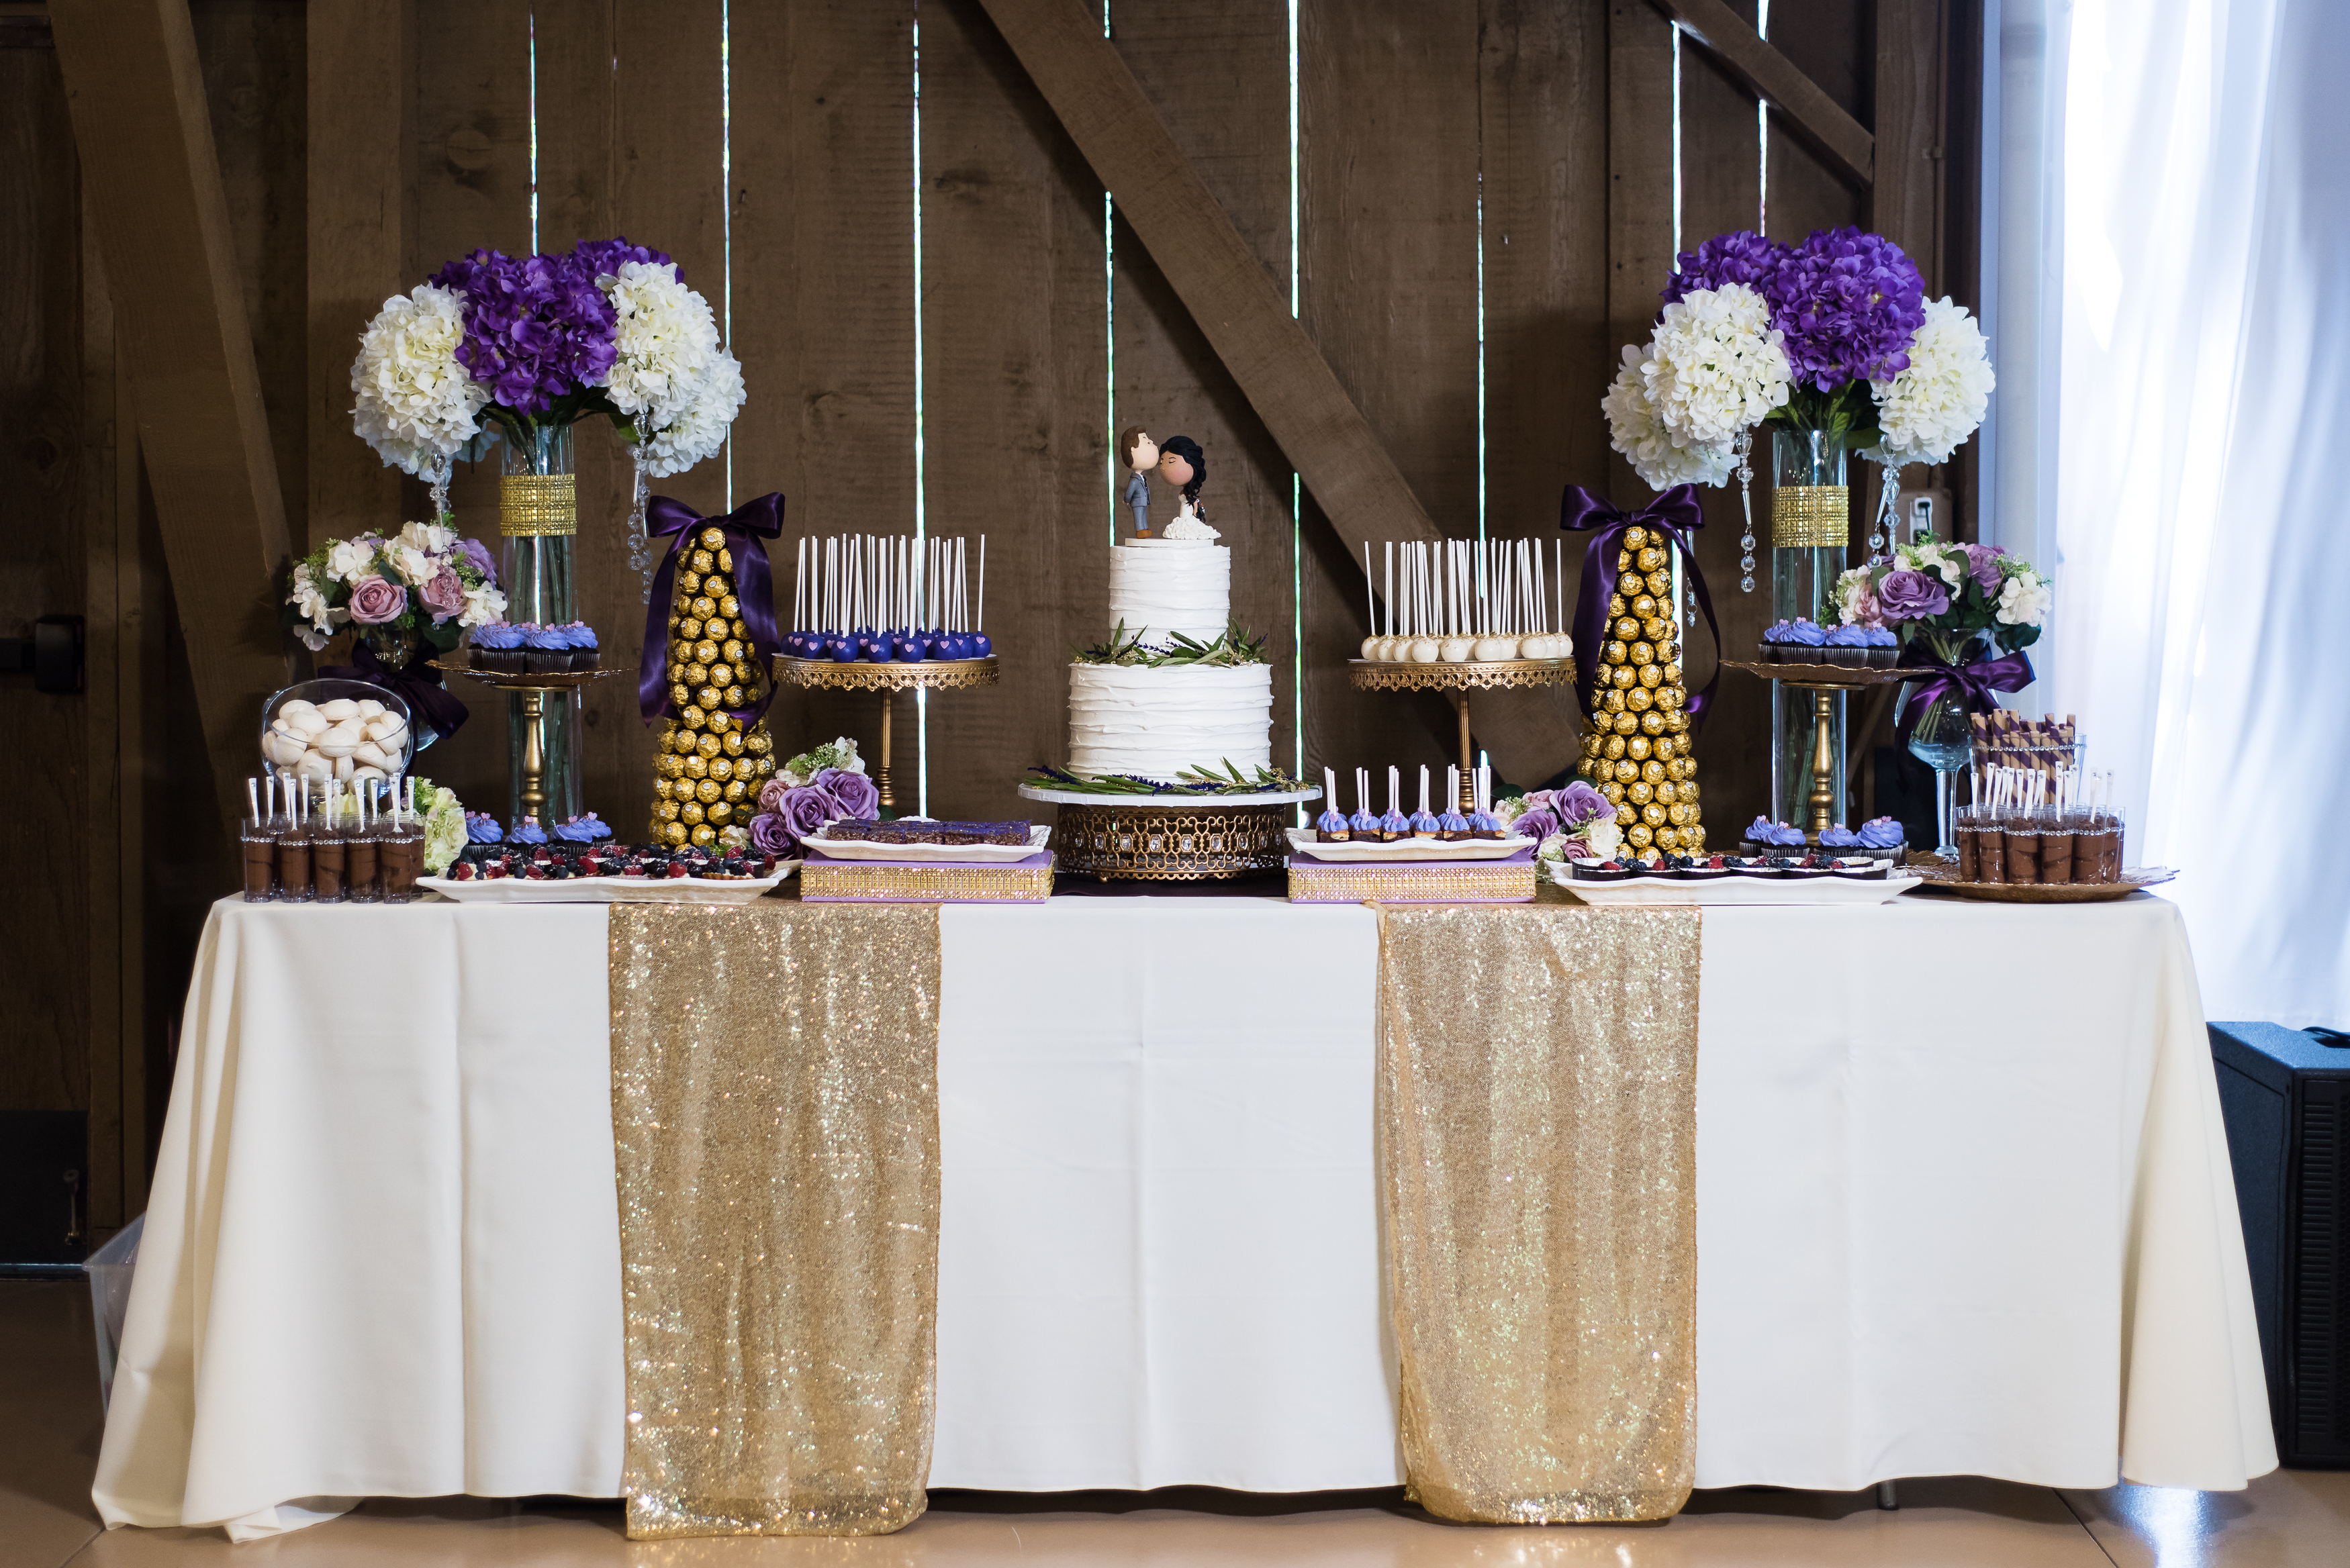 Dessert table with purple and white flowers, wedding cake, chocolate and cake pops